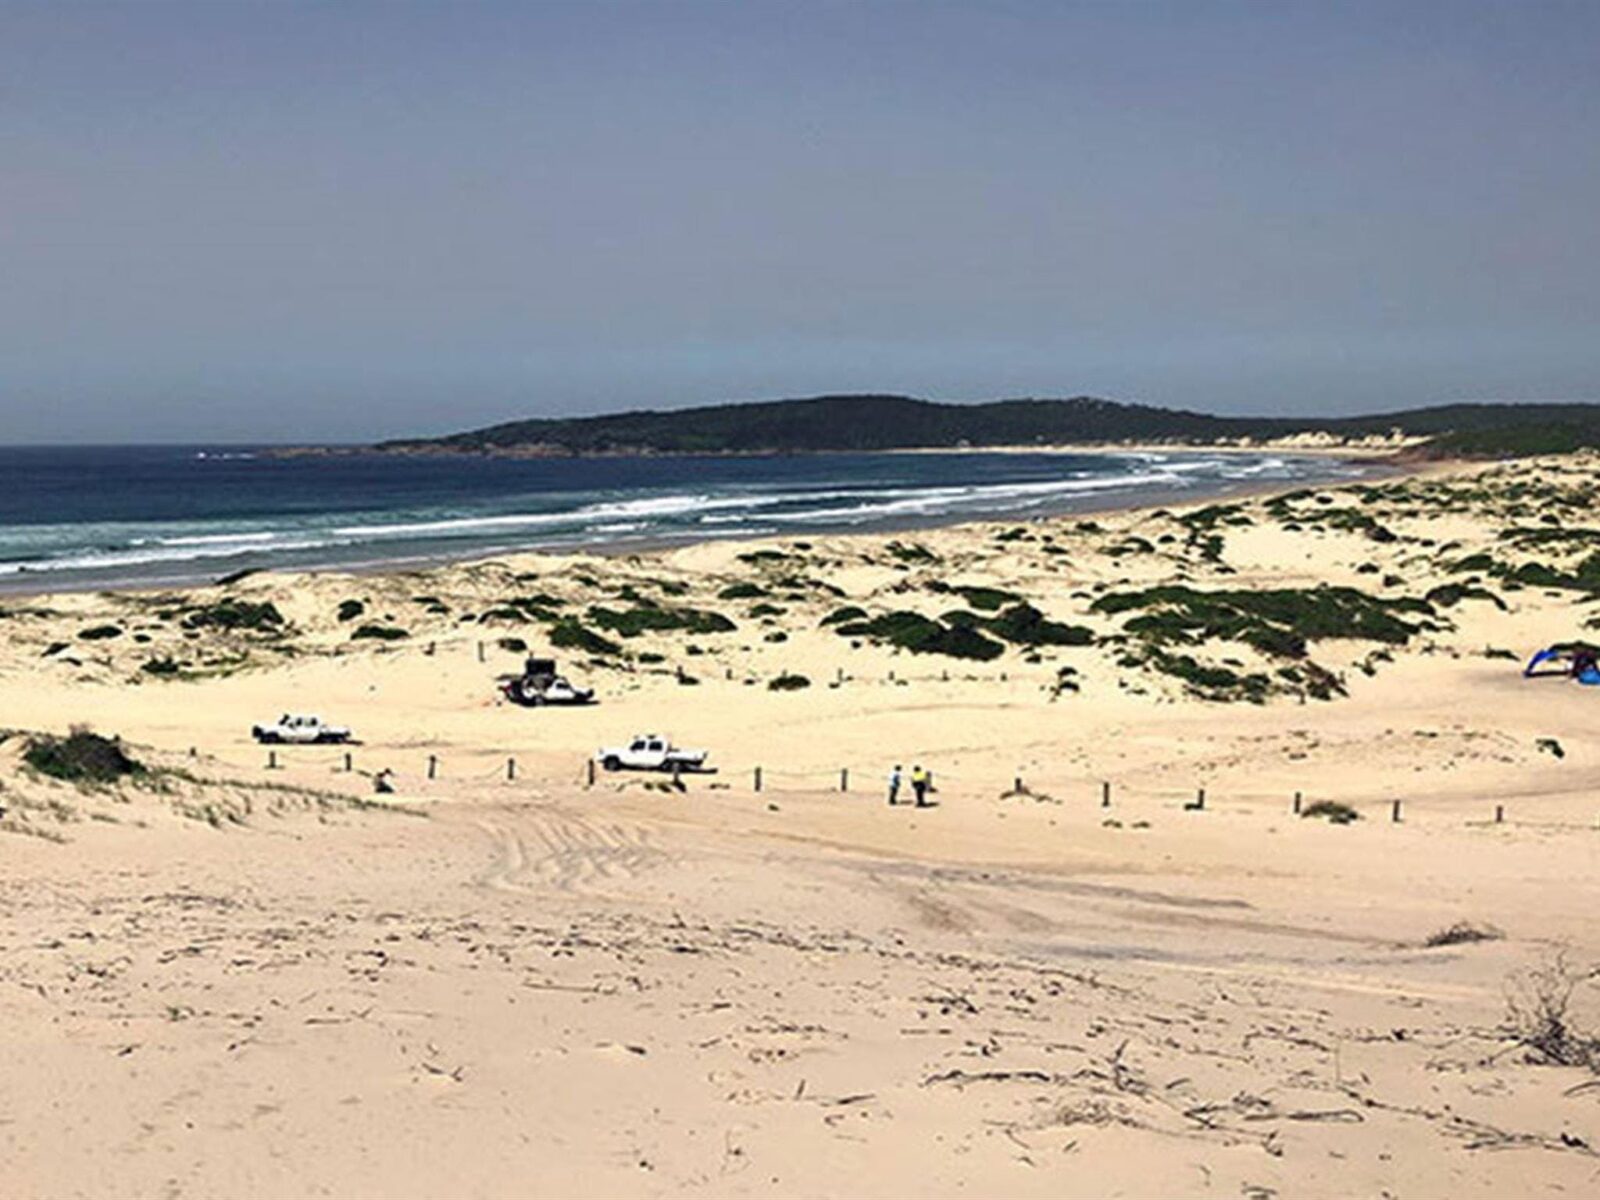 View across sand to vehicles, people, and a tent on Samurai Beach in Tomaree National Park. Photo: